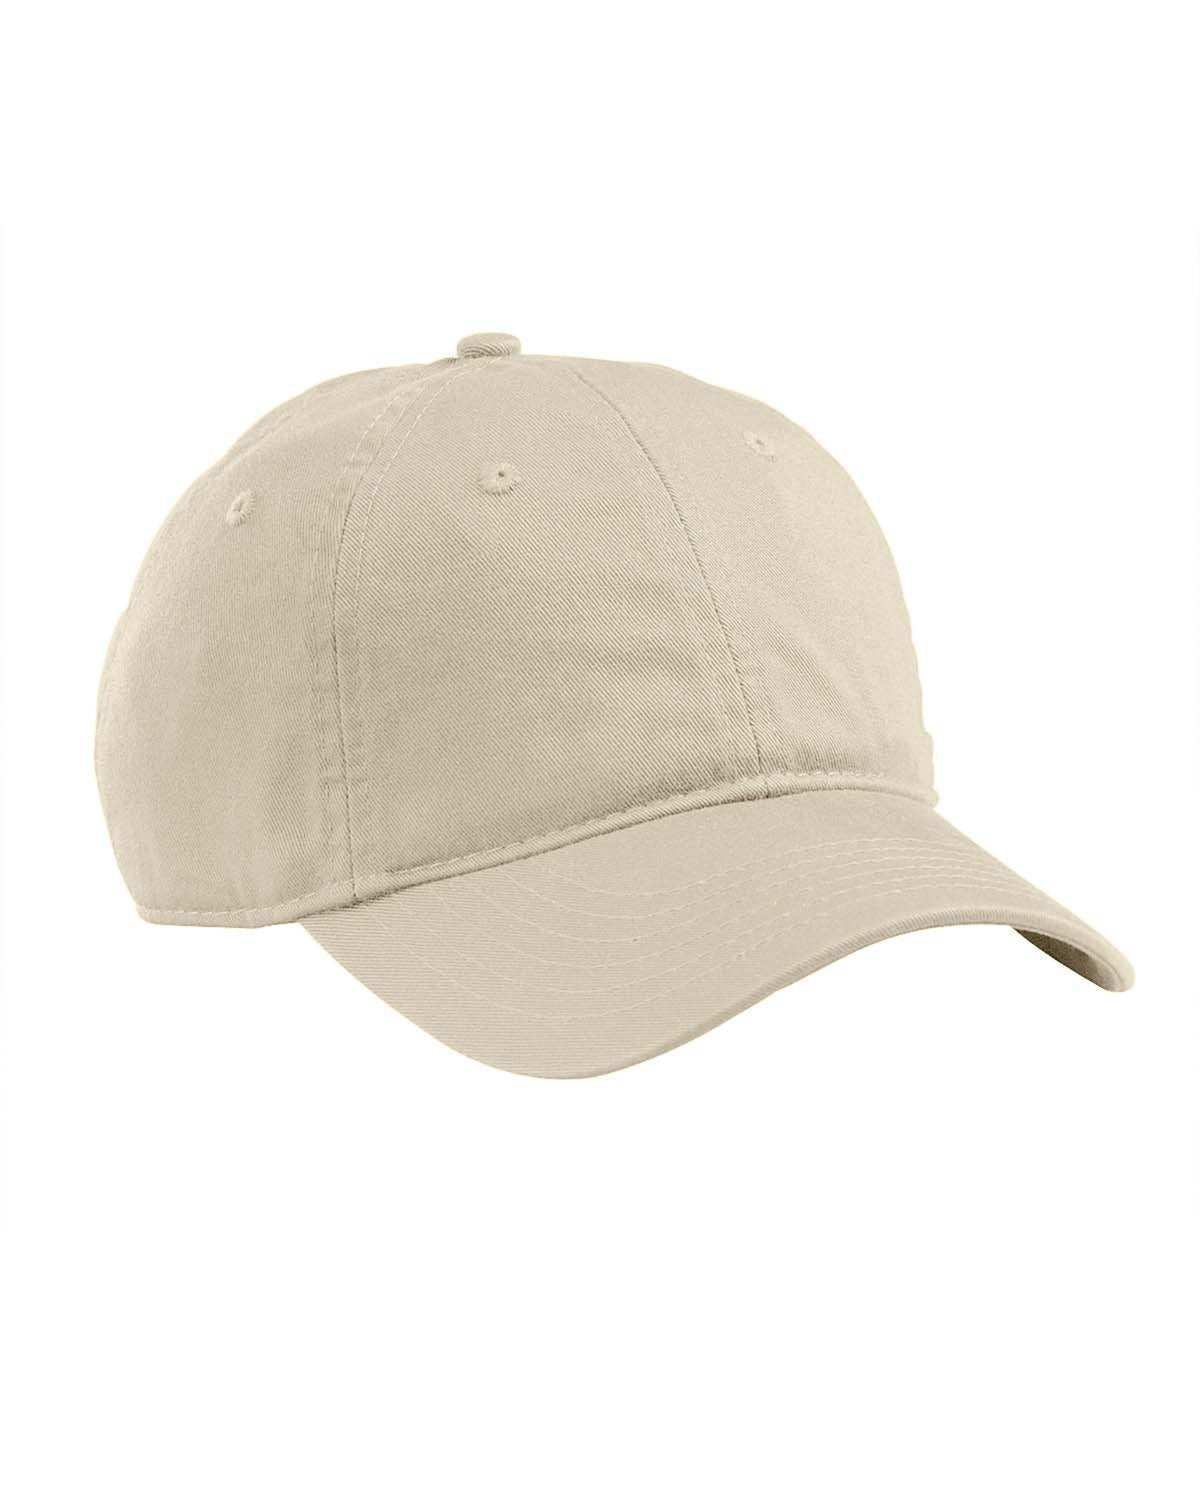 Customizable Econscious Organic Cotton Unstructured Baseball Hat in oyster.